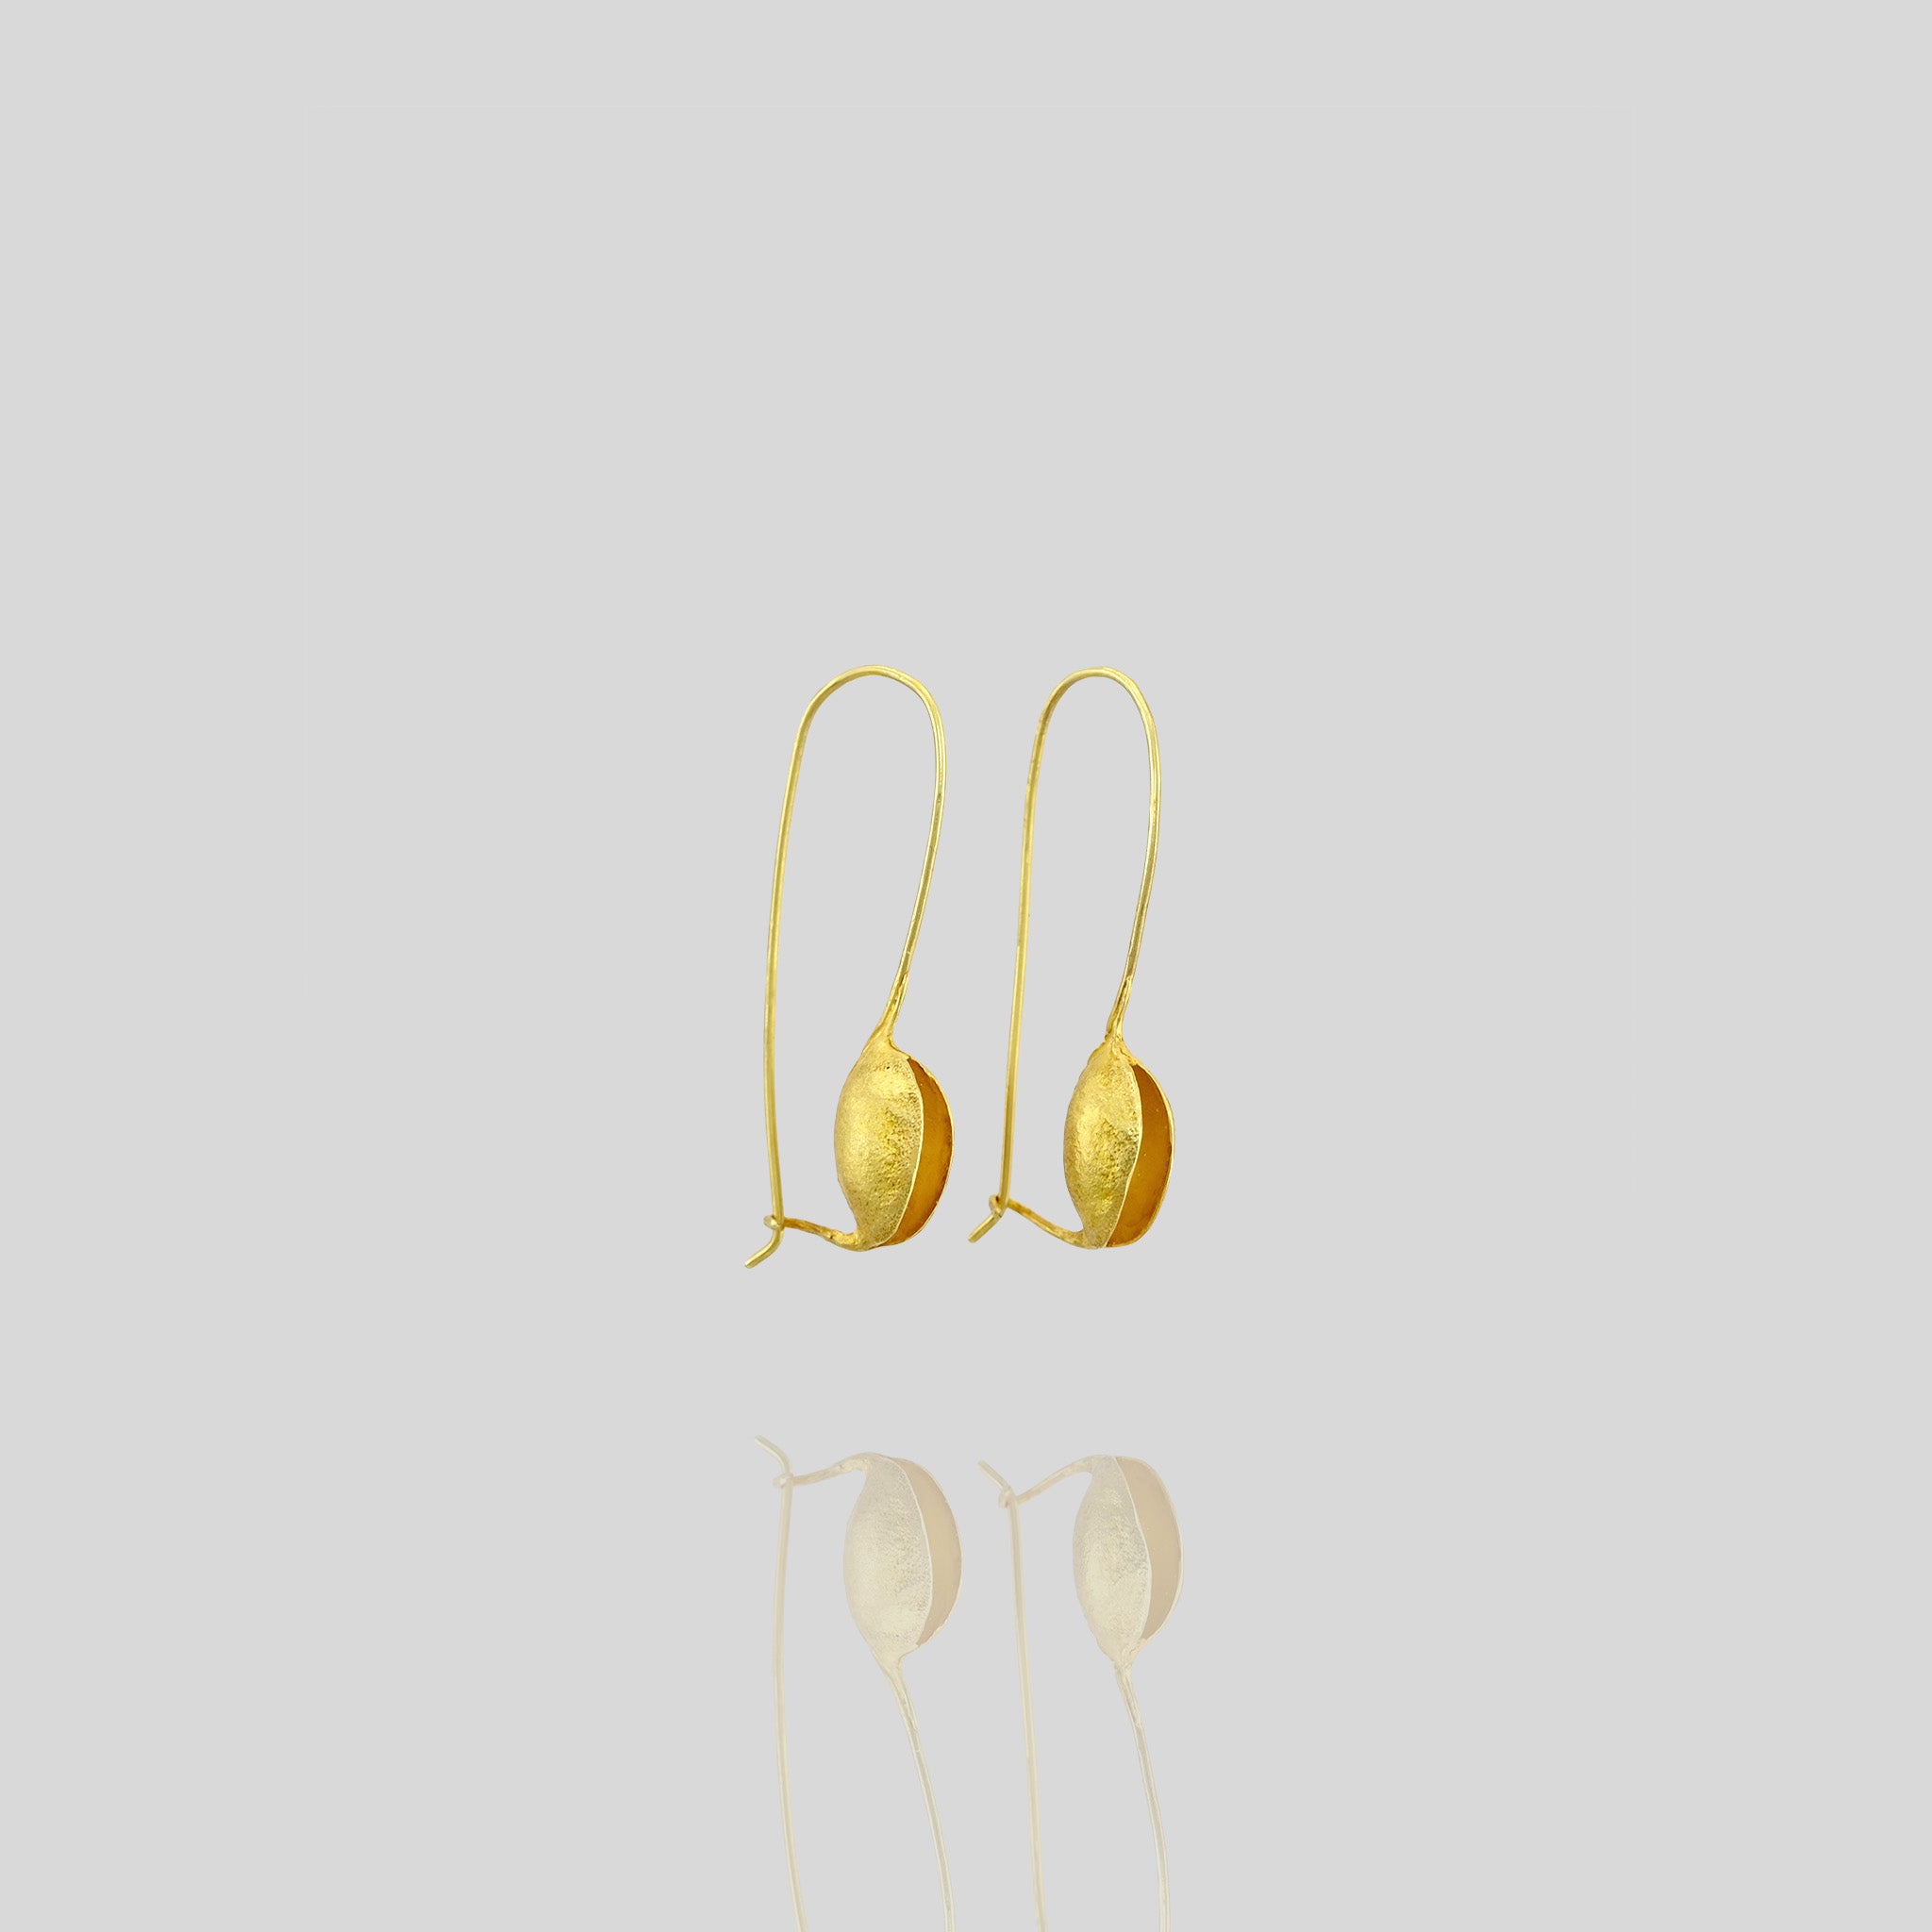 Nature-inspired 18k Gold drop earrings, replicating captivating dried seeds. Minimalistic, chic, and elegant, embodying natural beauty and femininity.